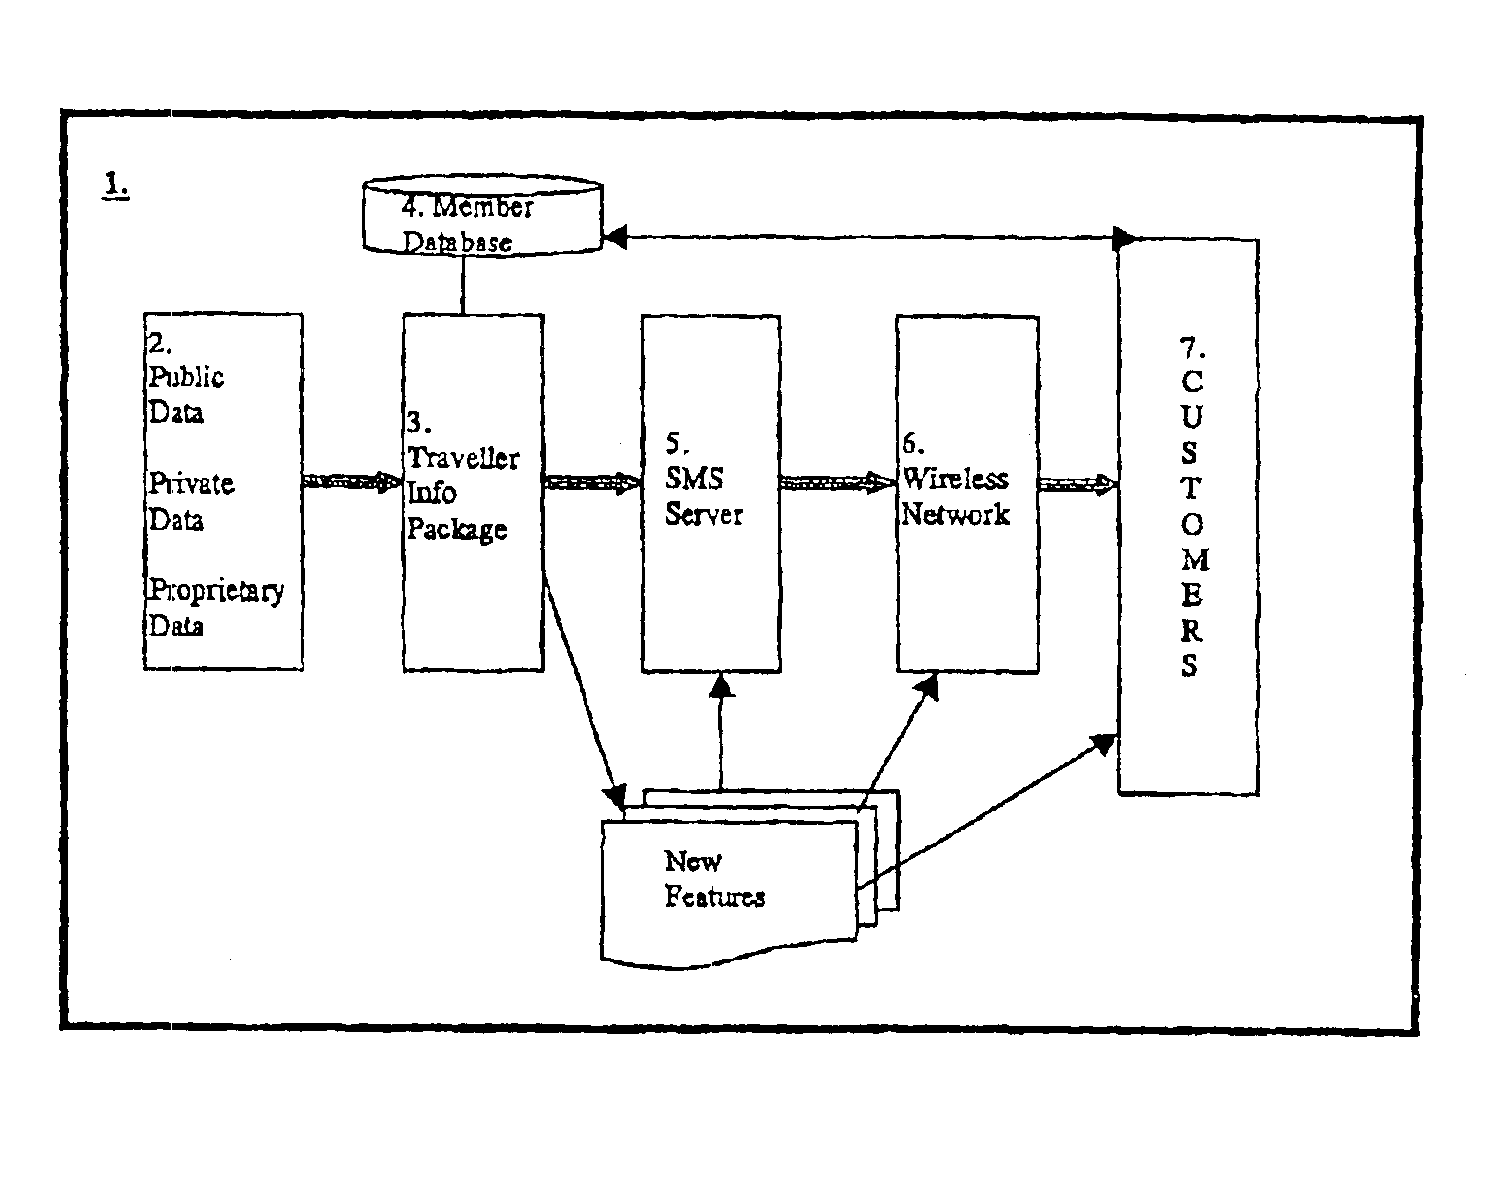 Method and system for providing traffic and related information